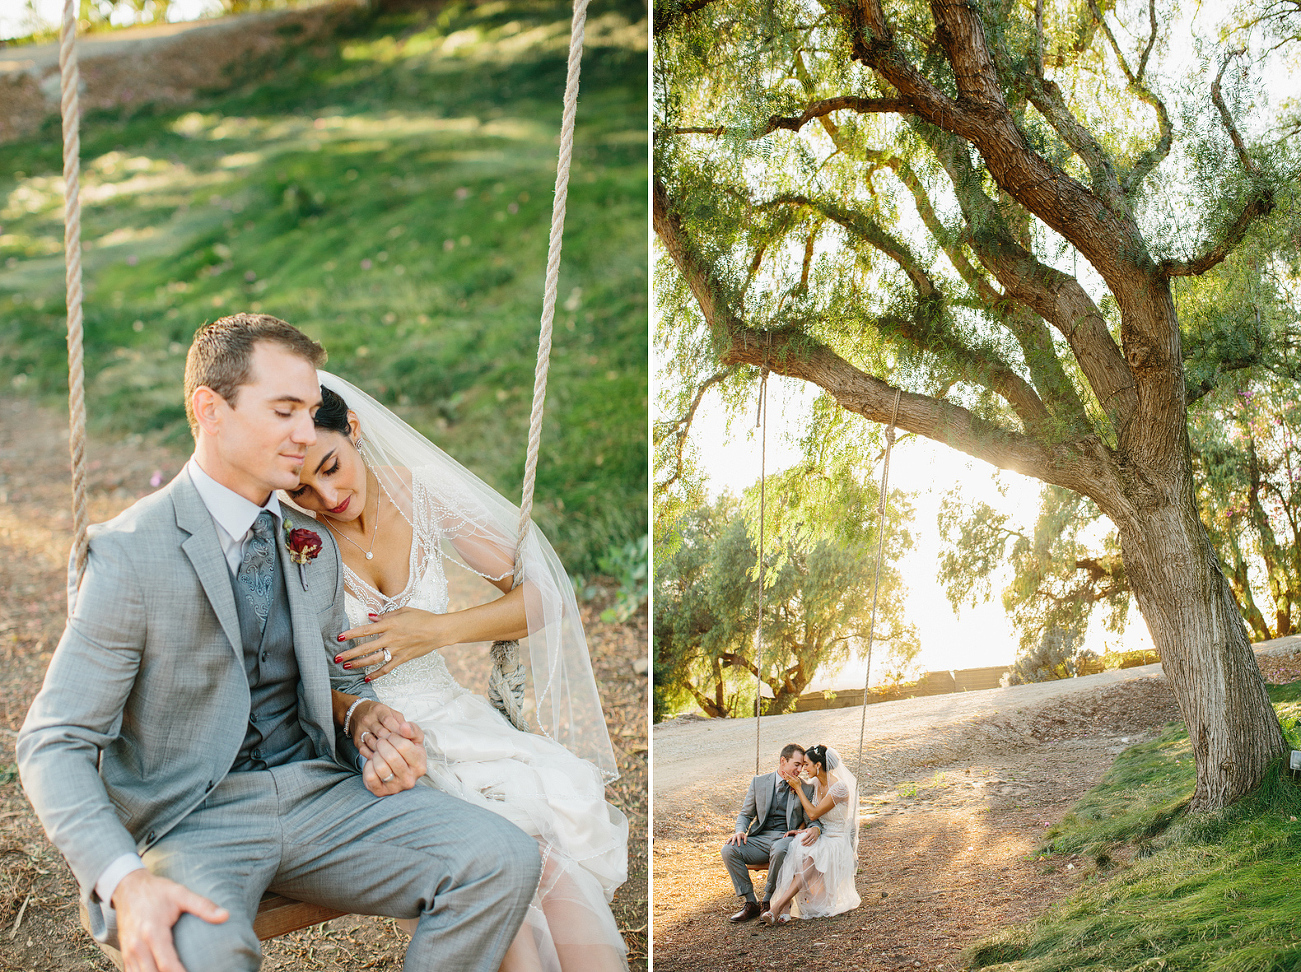 Sweet photos of the couple on a swing. 